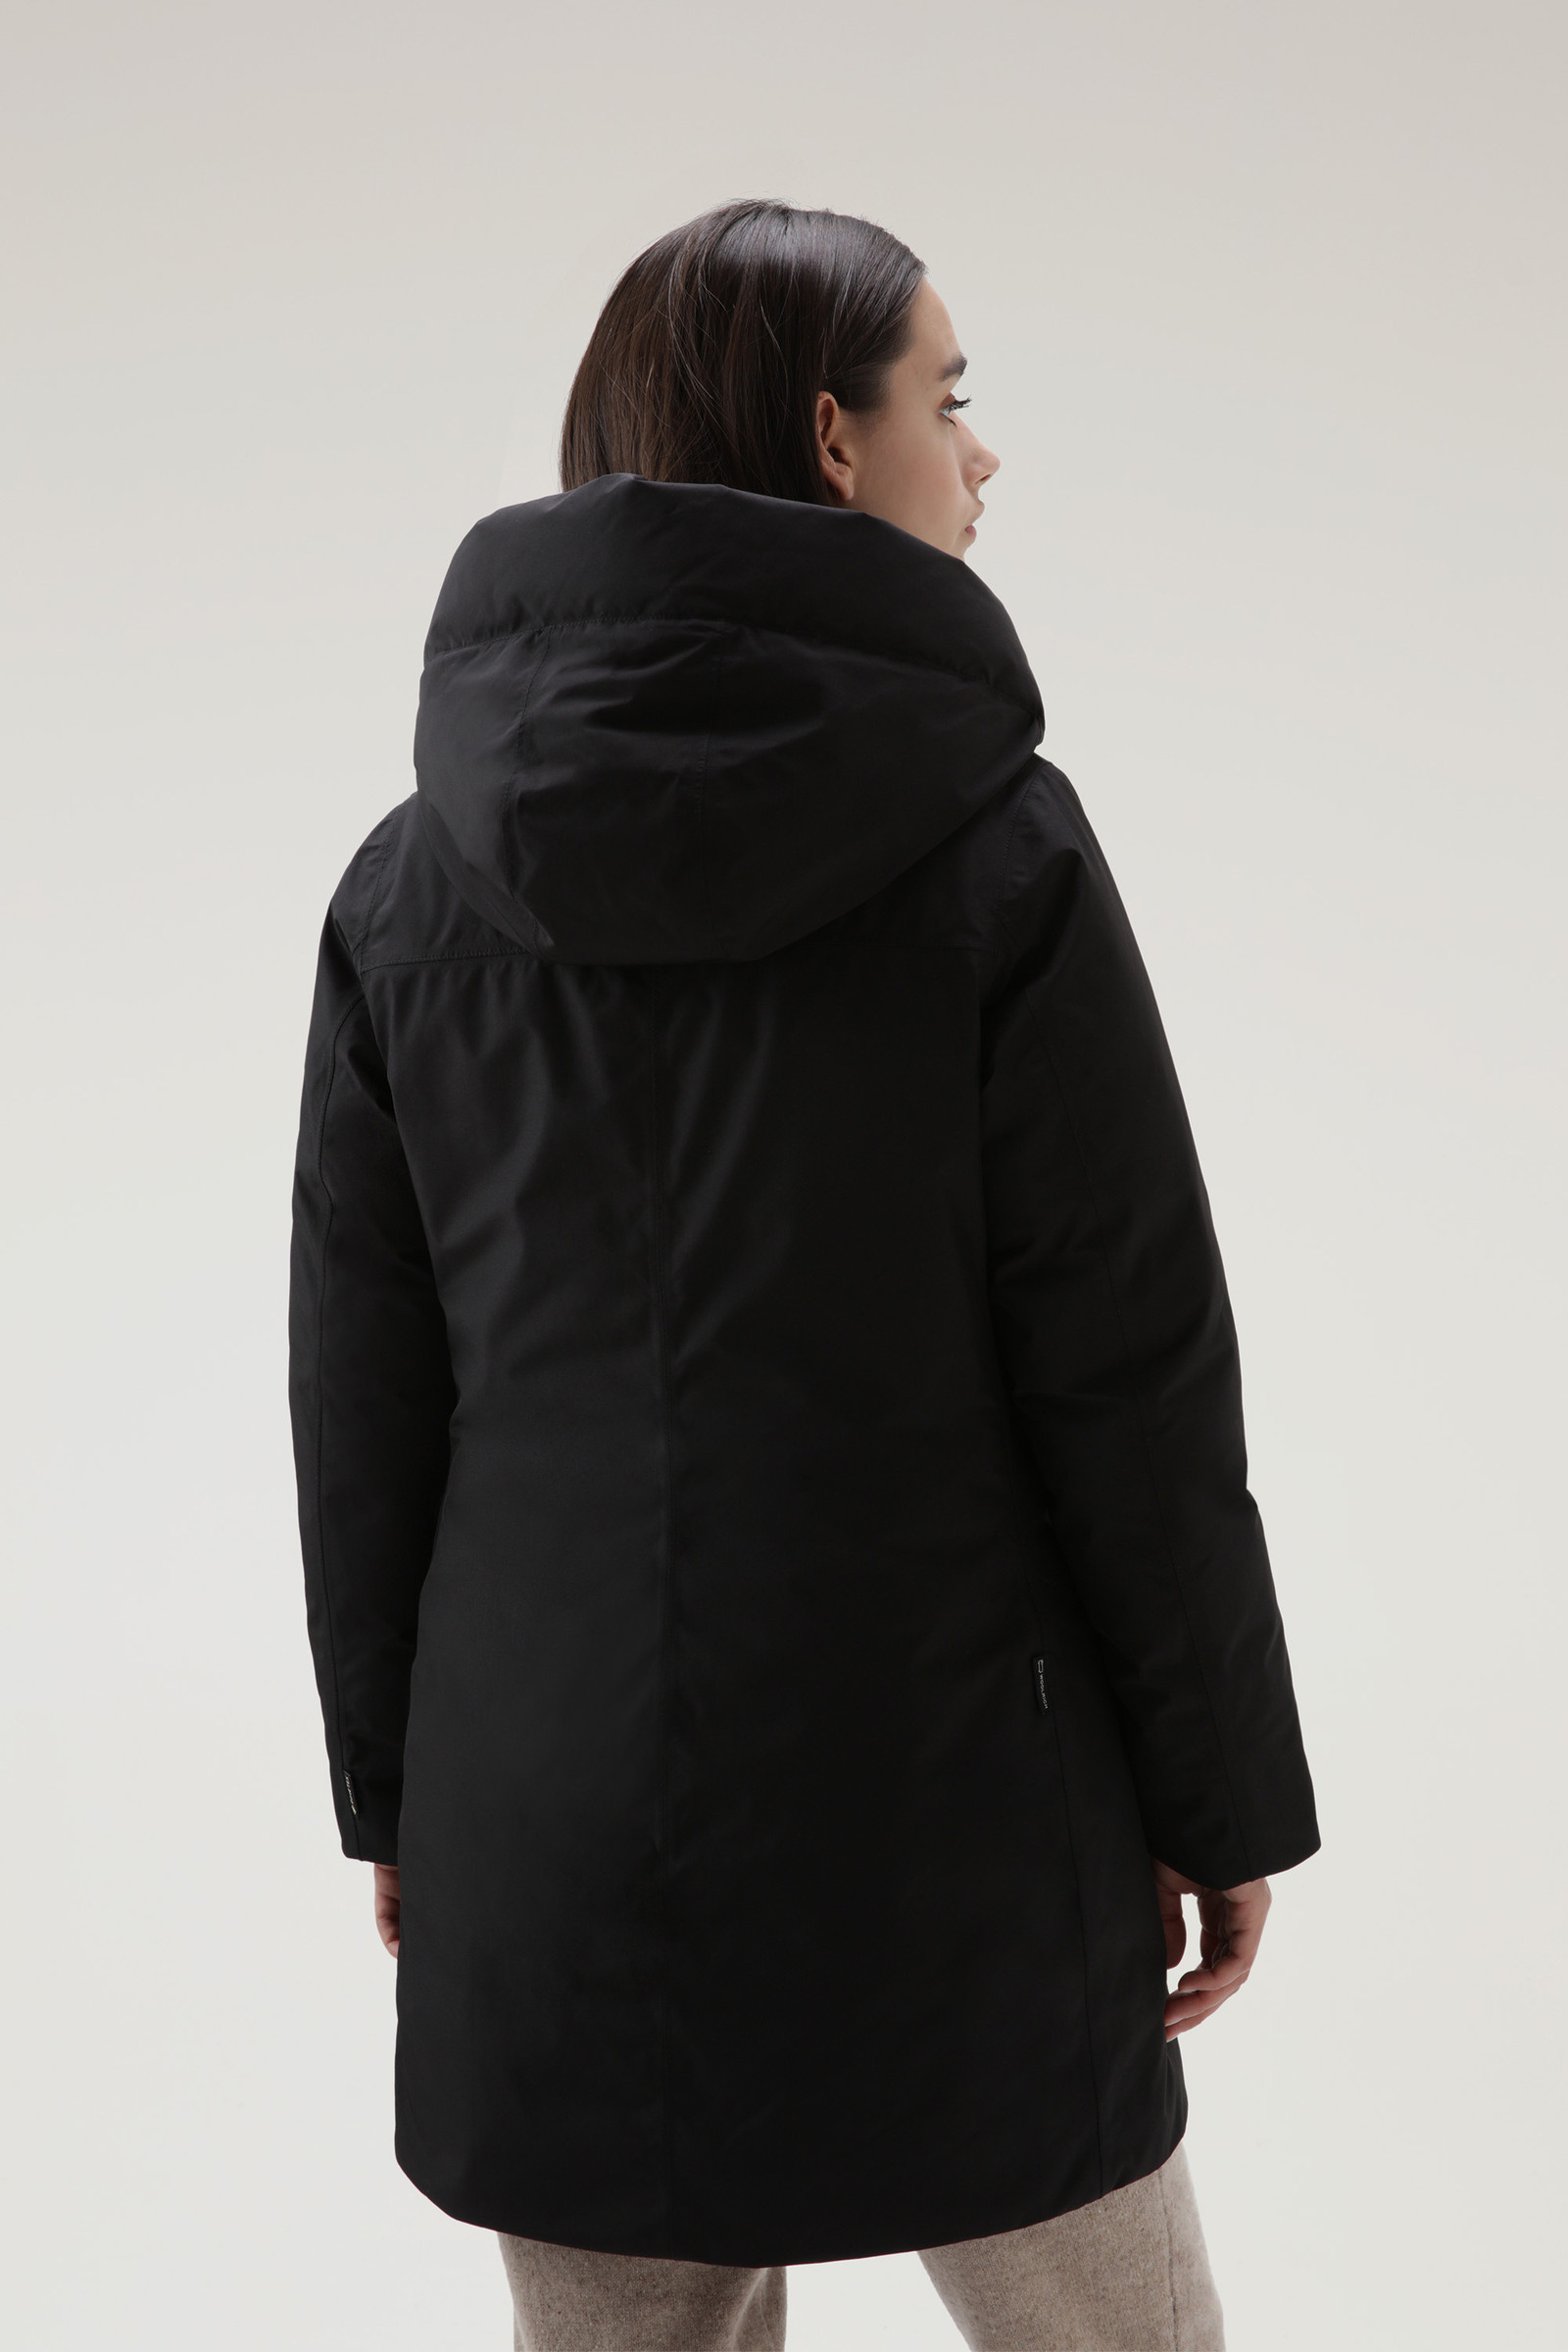 Marshall Parka impermeable de GORE-TEX Mujer negro Woolrich